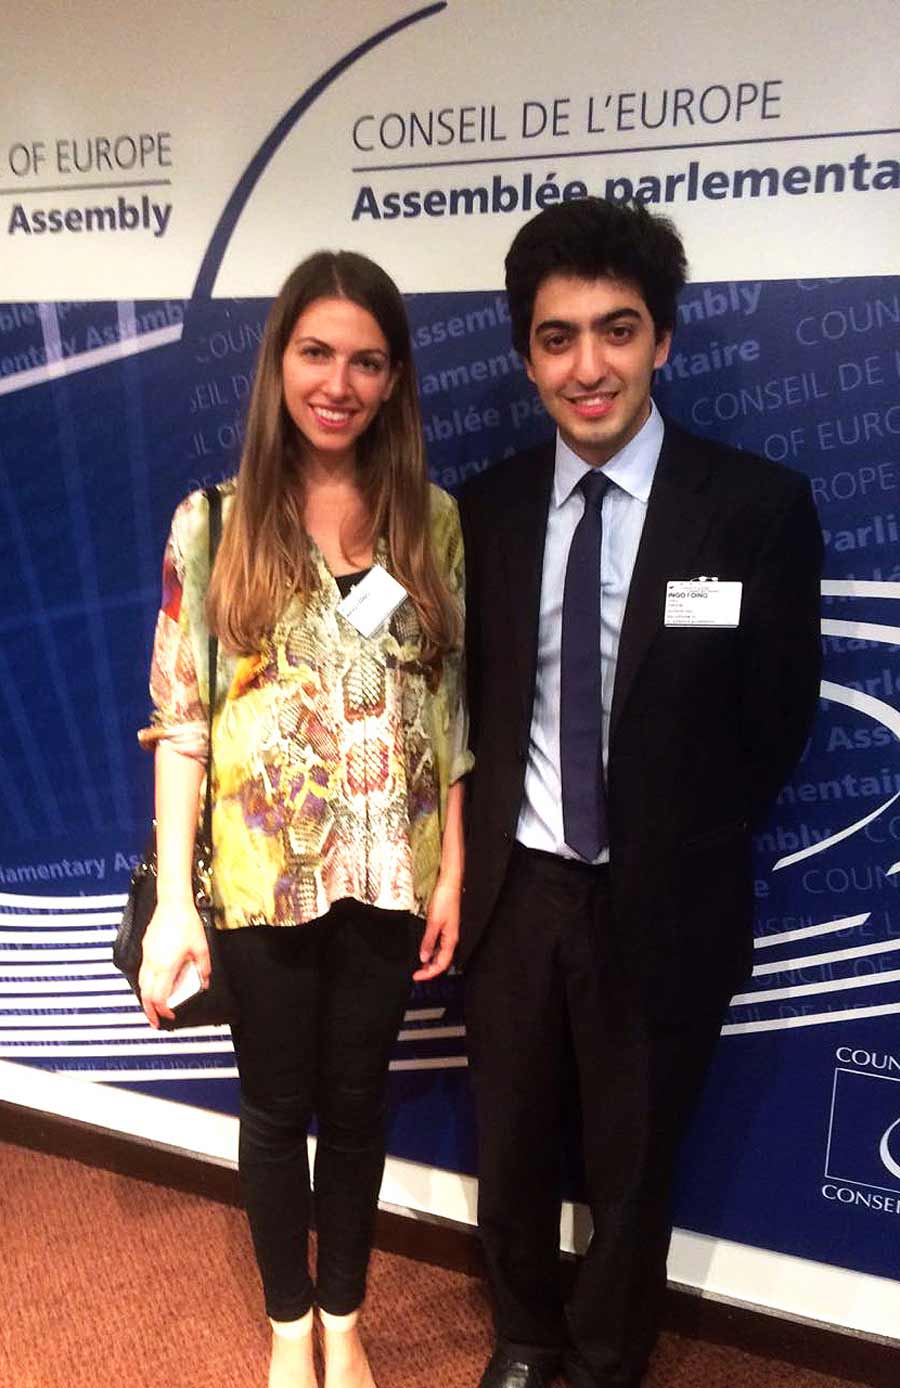 BIC representatives Tala Ram (left) and Collis Tahzib (right) at the Council of Europe Conference of International NGOS in Strasbourg.